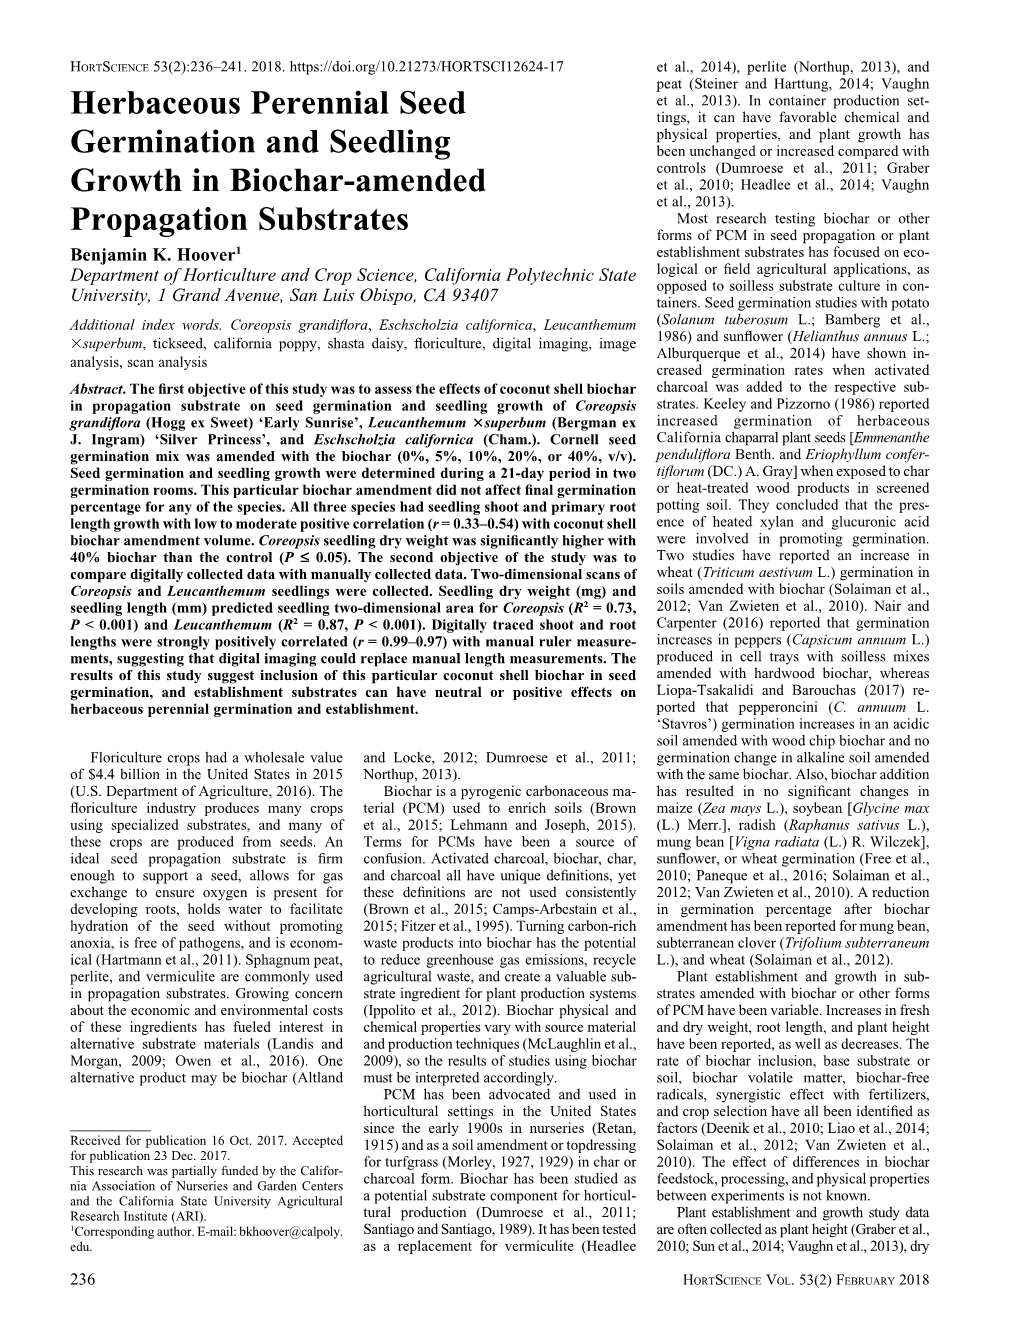 Herbaceous Perennial Seed Germination and Seedling Growth in Biochar-Amended Propagation Substrates